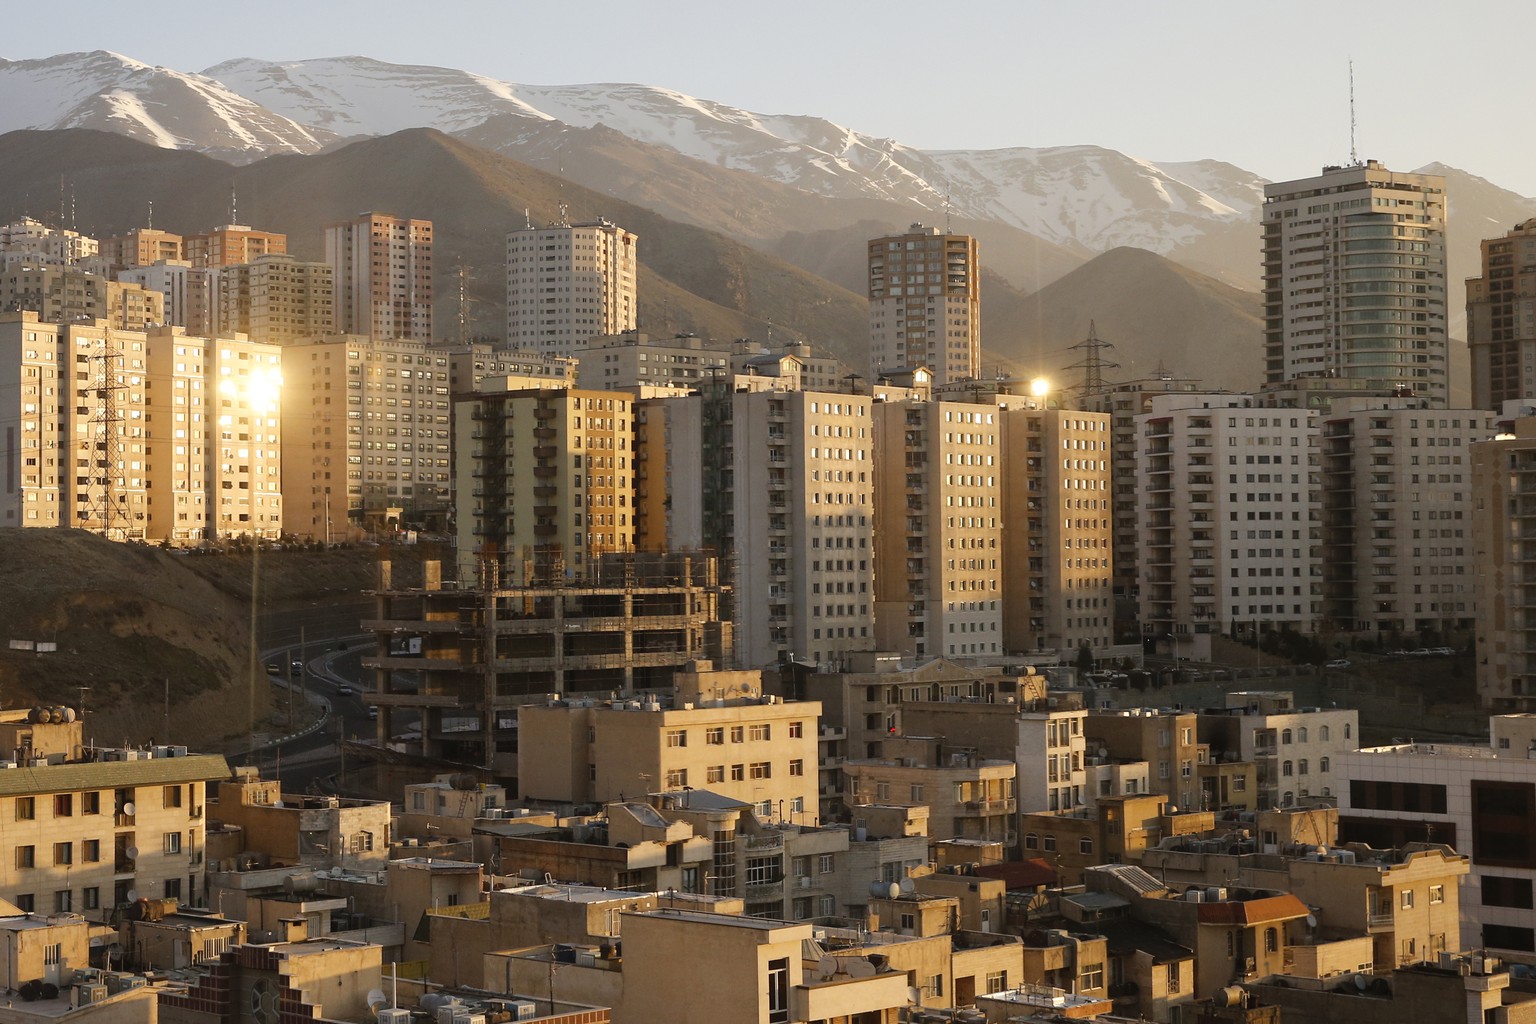 Morning View of the city of Teheran, Iran, Saturday, February 27, 2016. The Swiss President Johann N. Schneider-Ammann attends a three-day-visit to Iran, accompanied by an economic and scientific dele ...